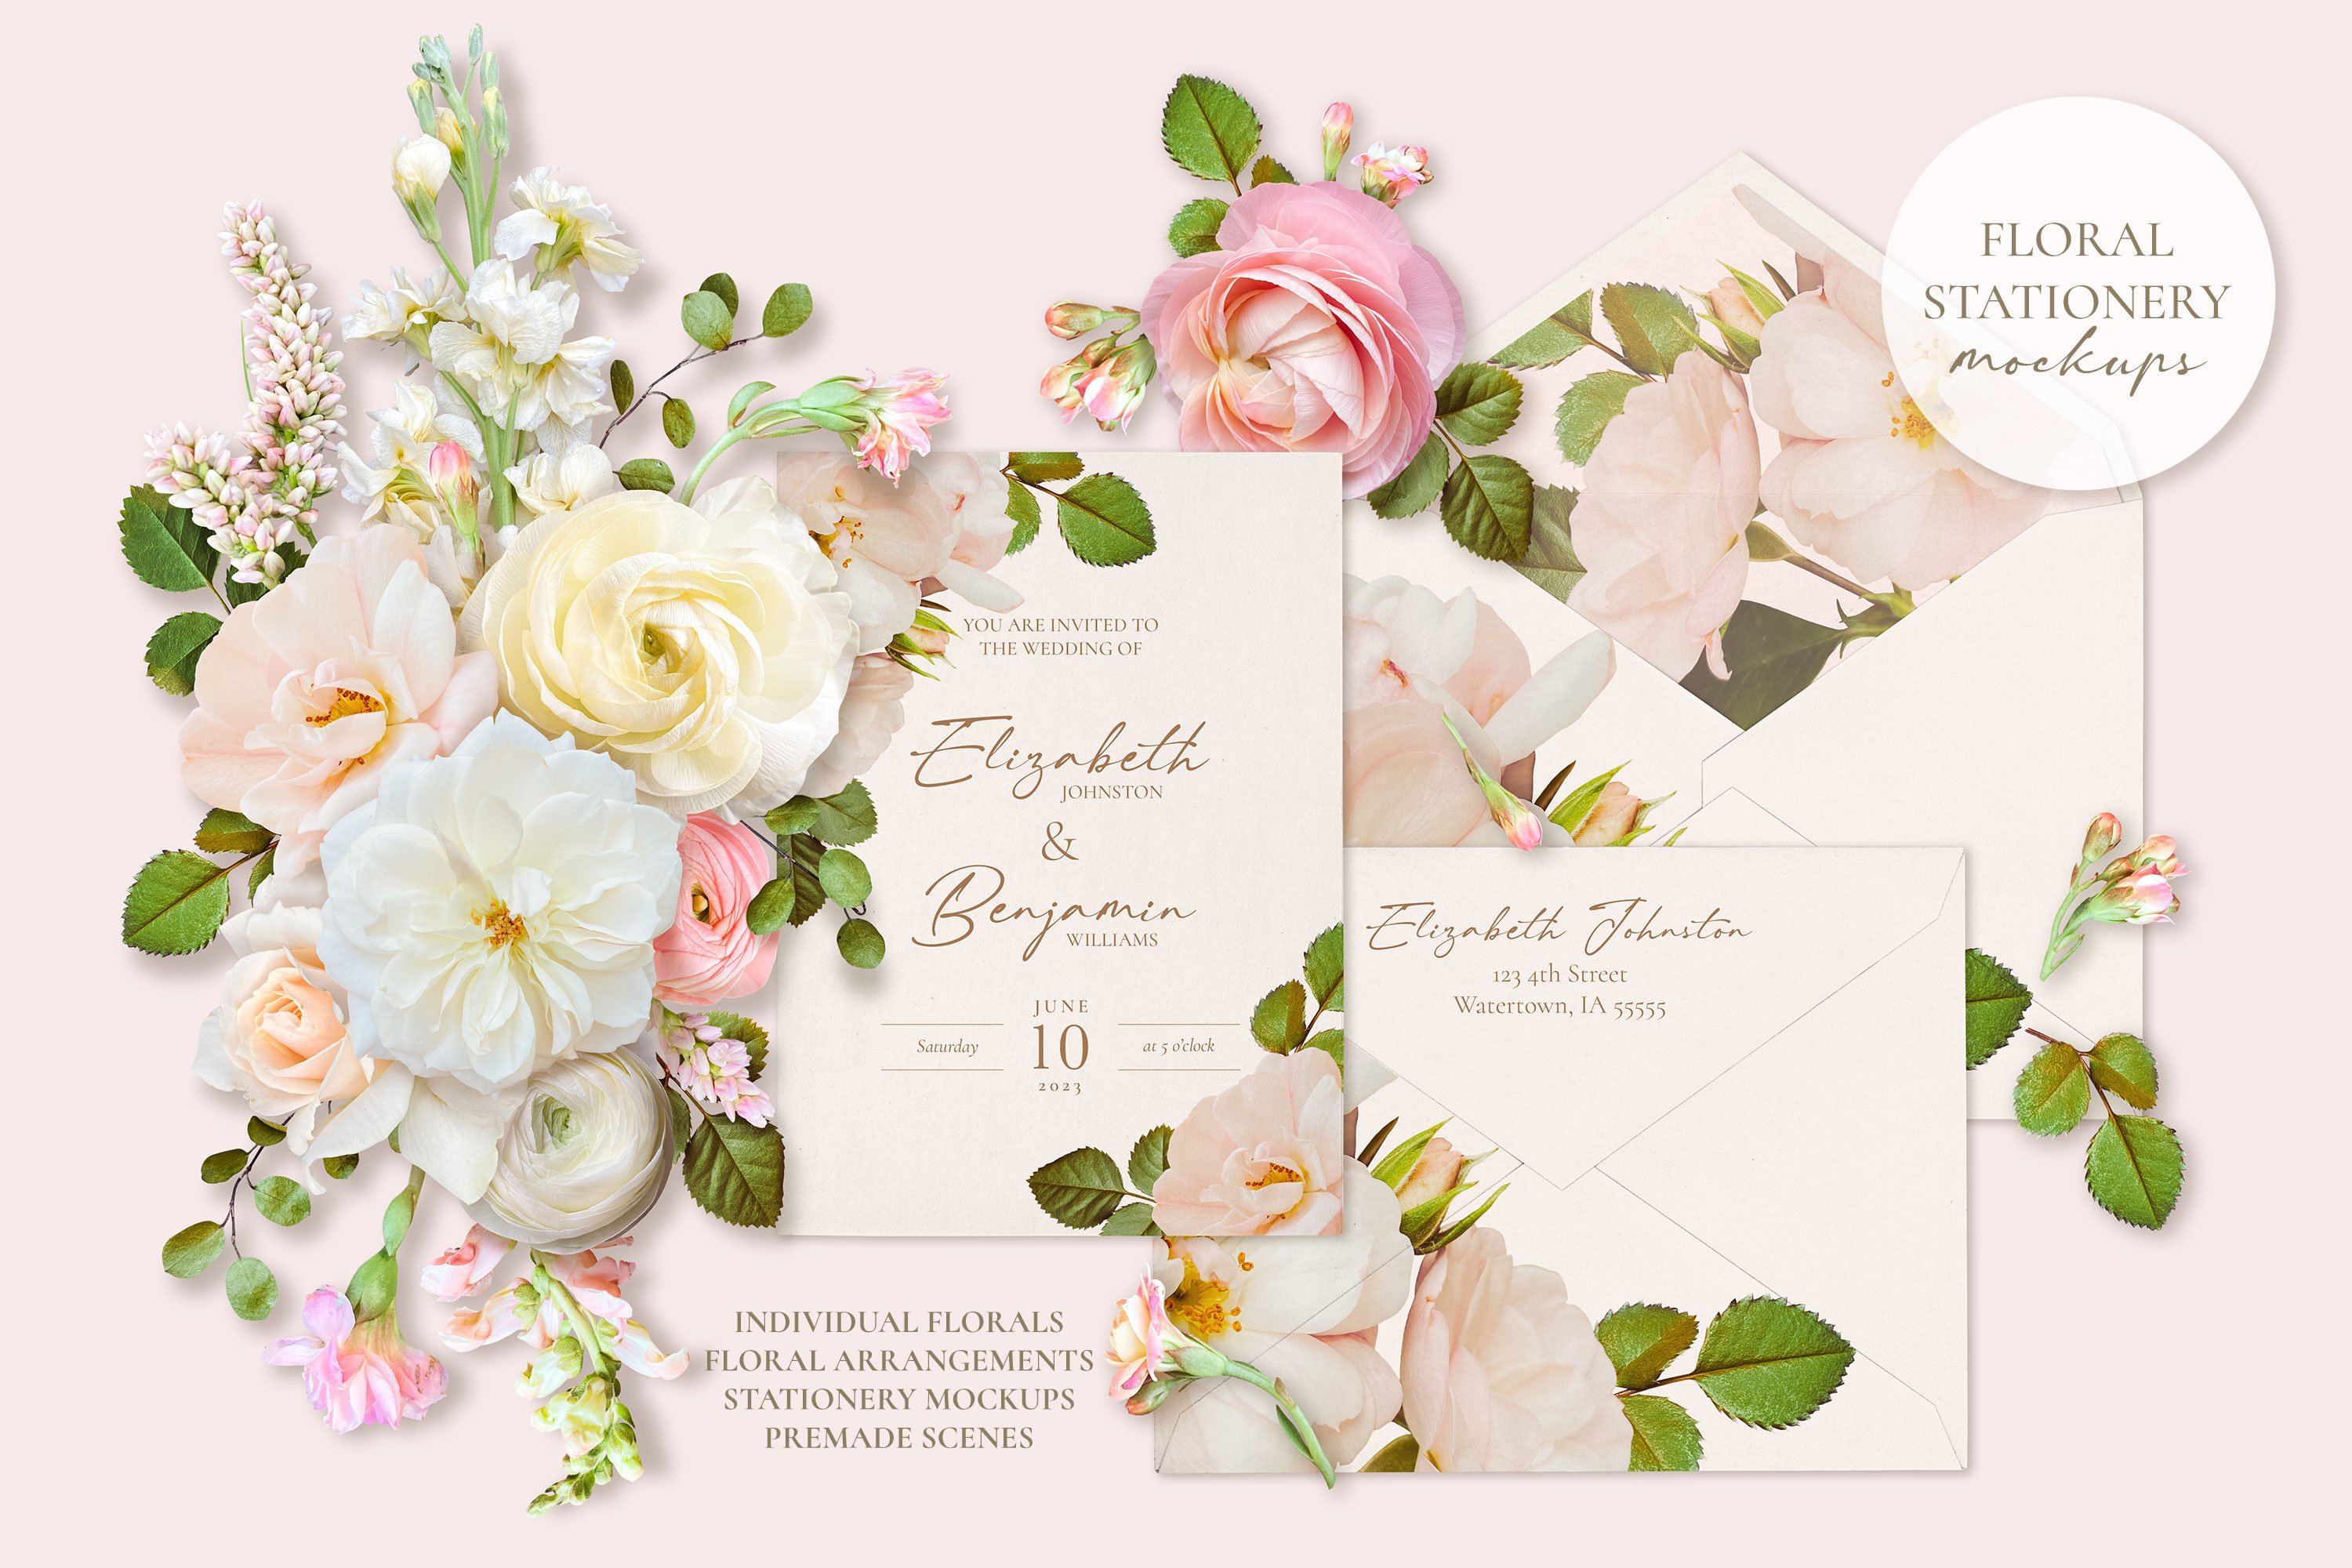 Floral Stationery Mockups & Flowers preview image.